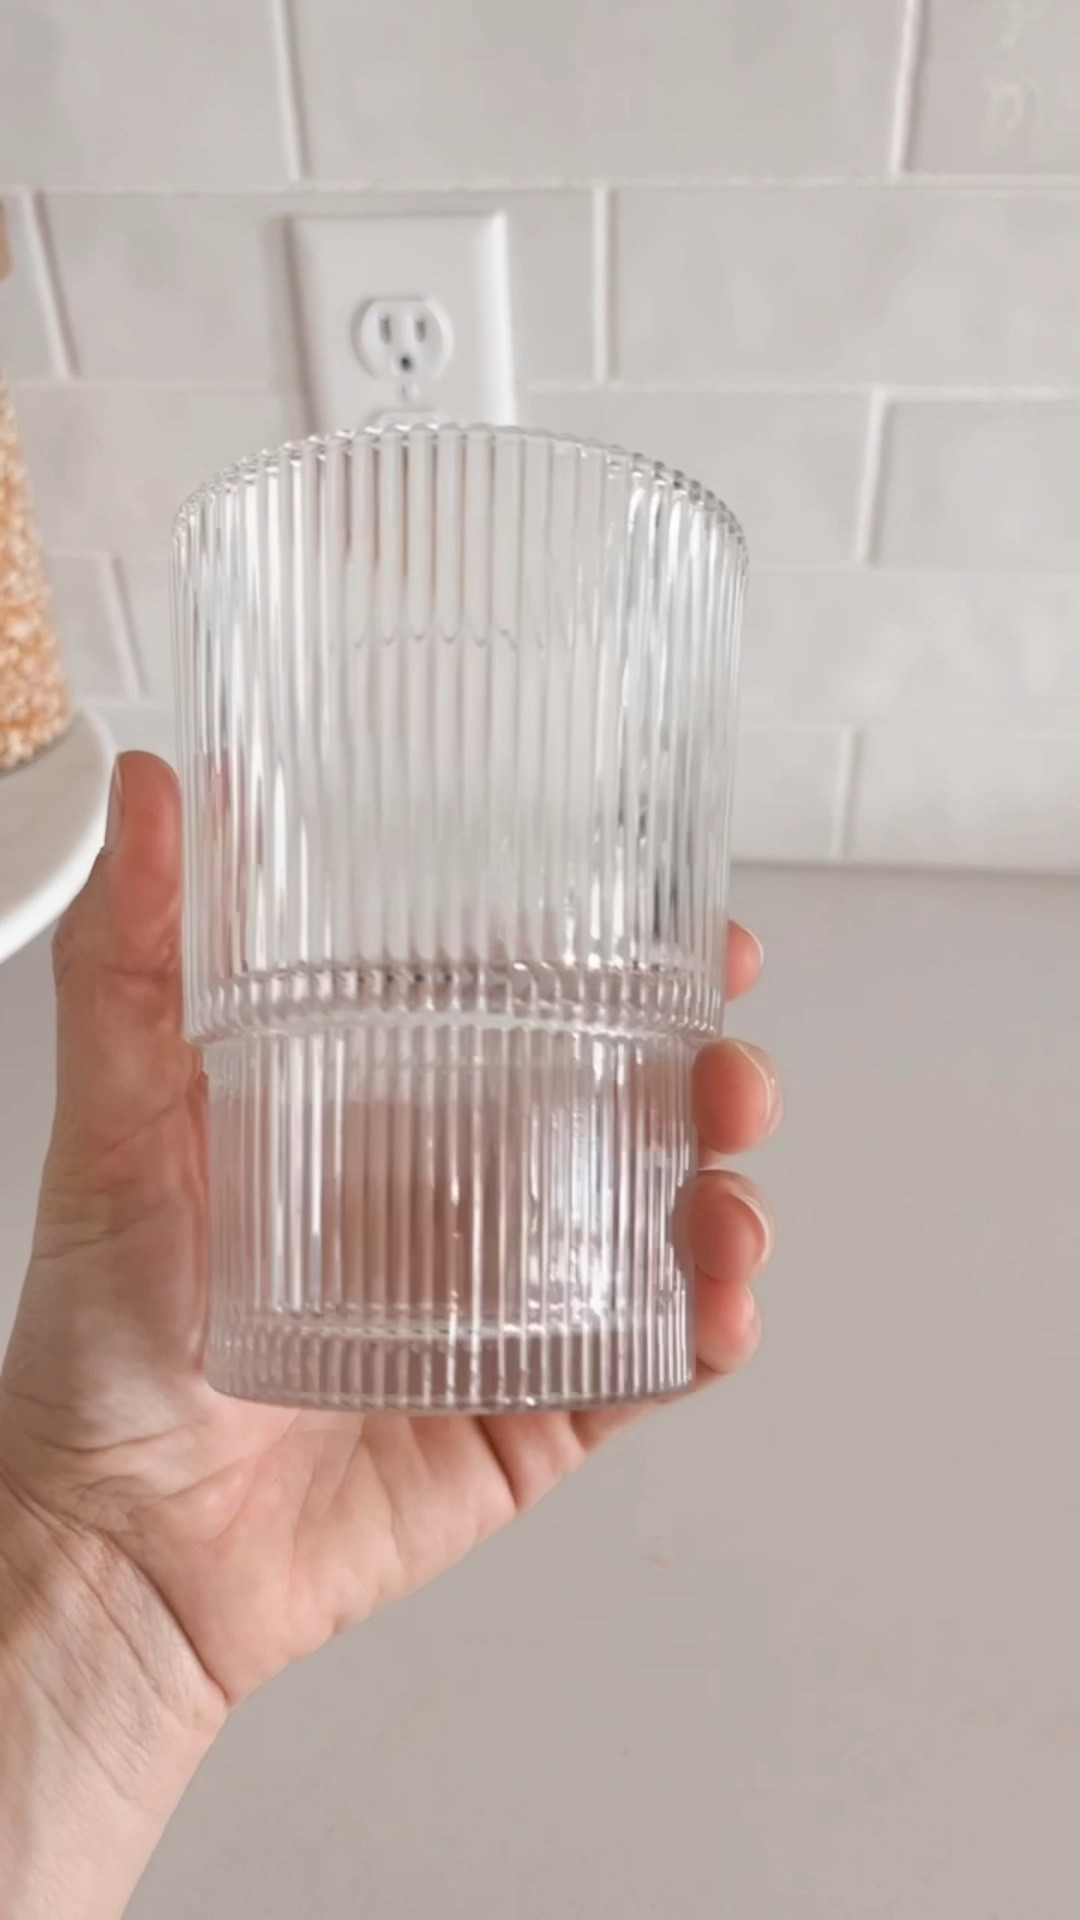 Atwell Stackable Ribbed Drink Glasses